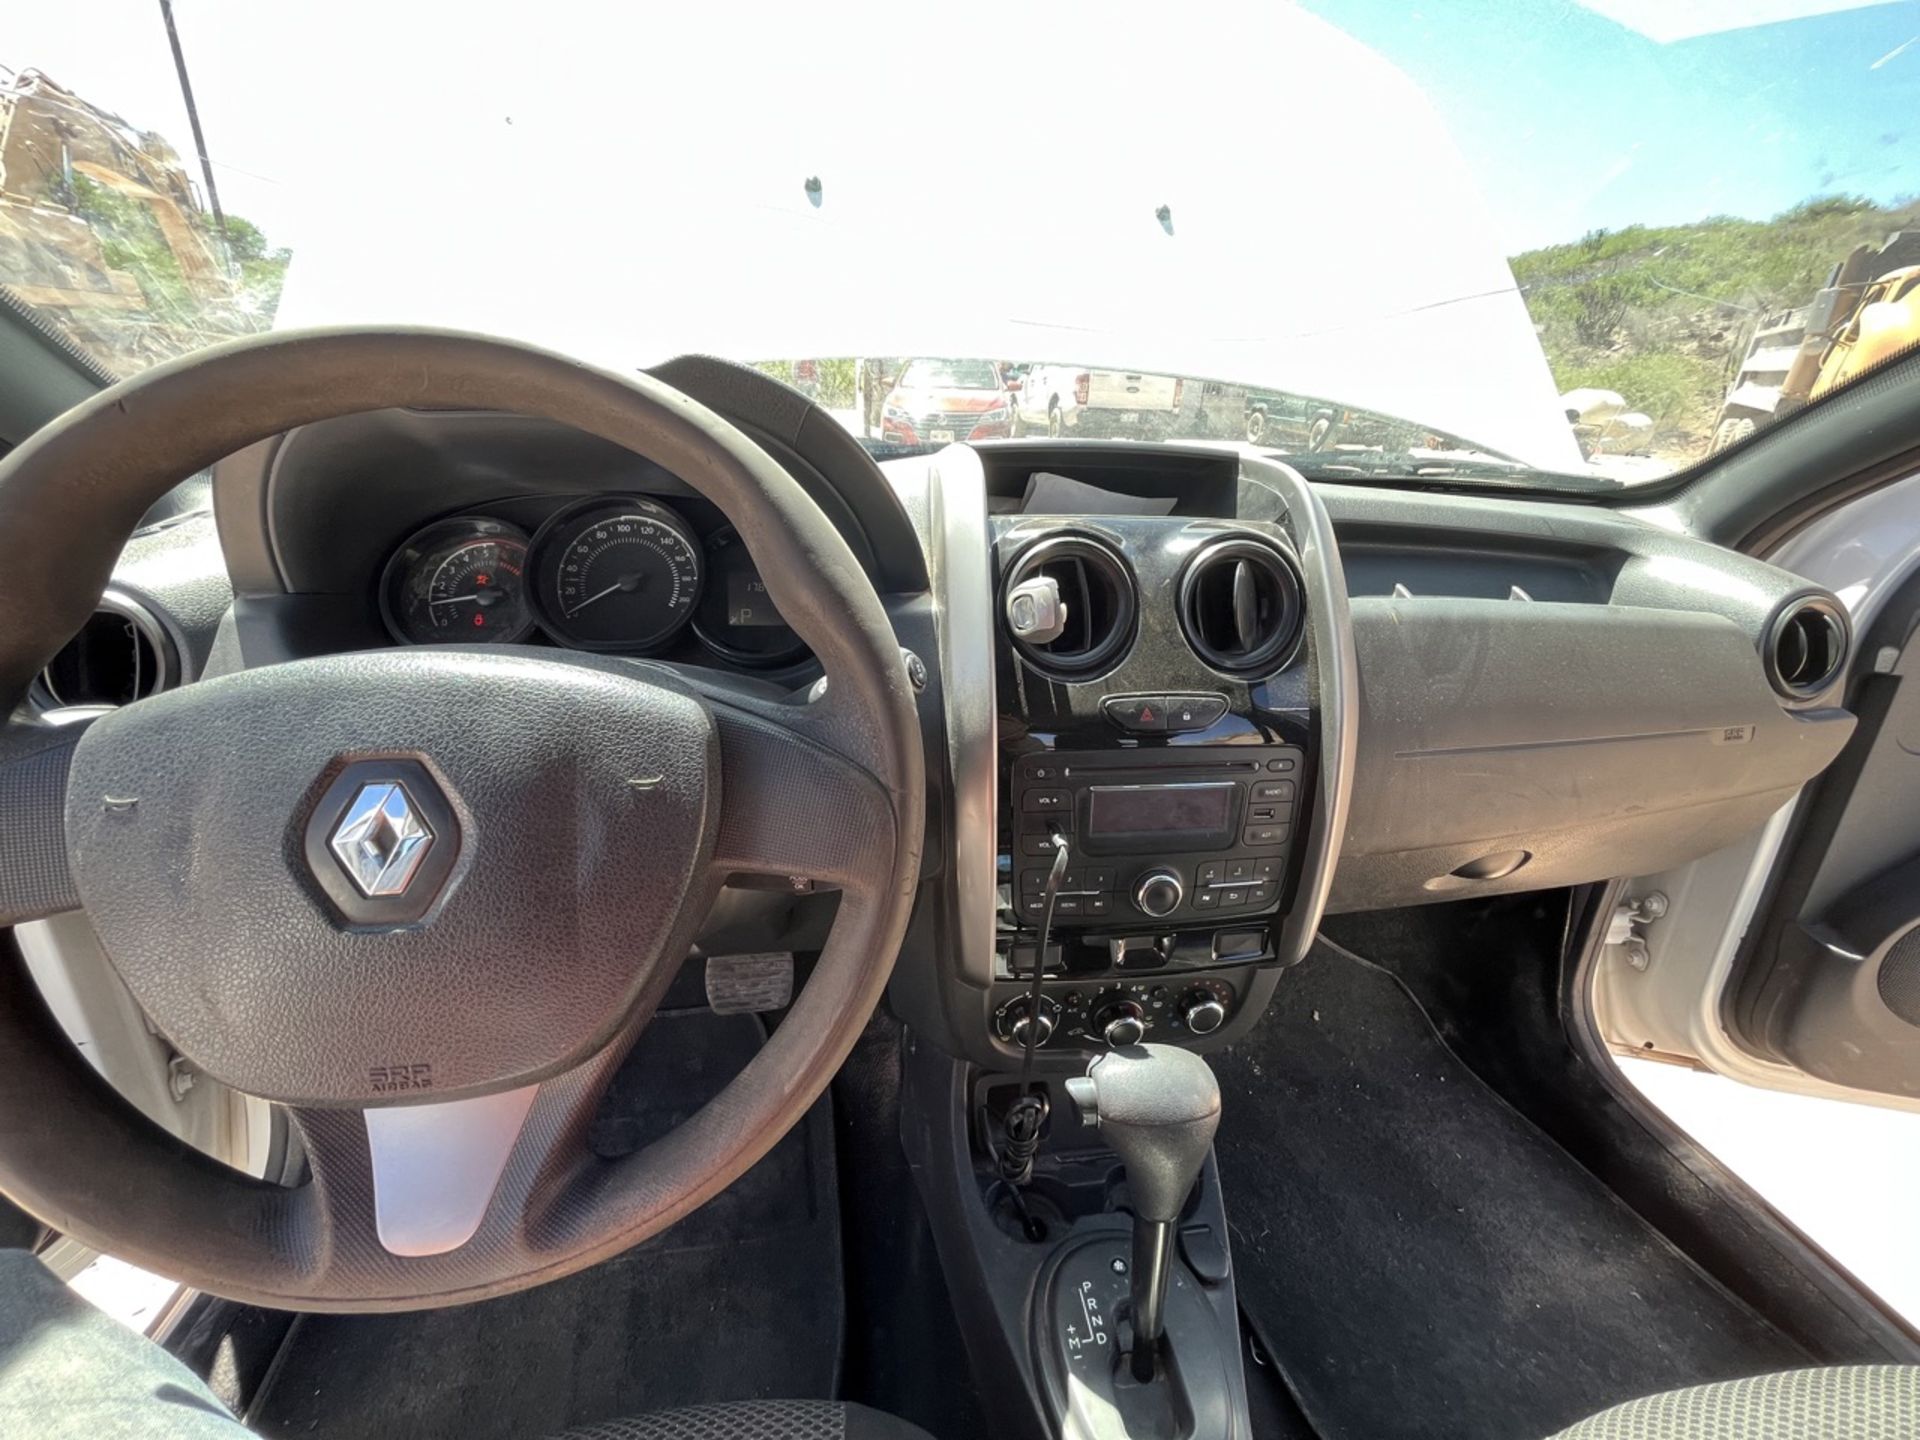 Renault Duster white vehicle, Series 9FBHS1FH4HM590467, Model 2017, automatic transmission, electr - Image 39 of 98